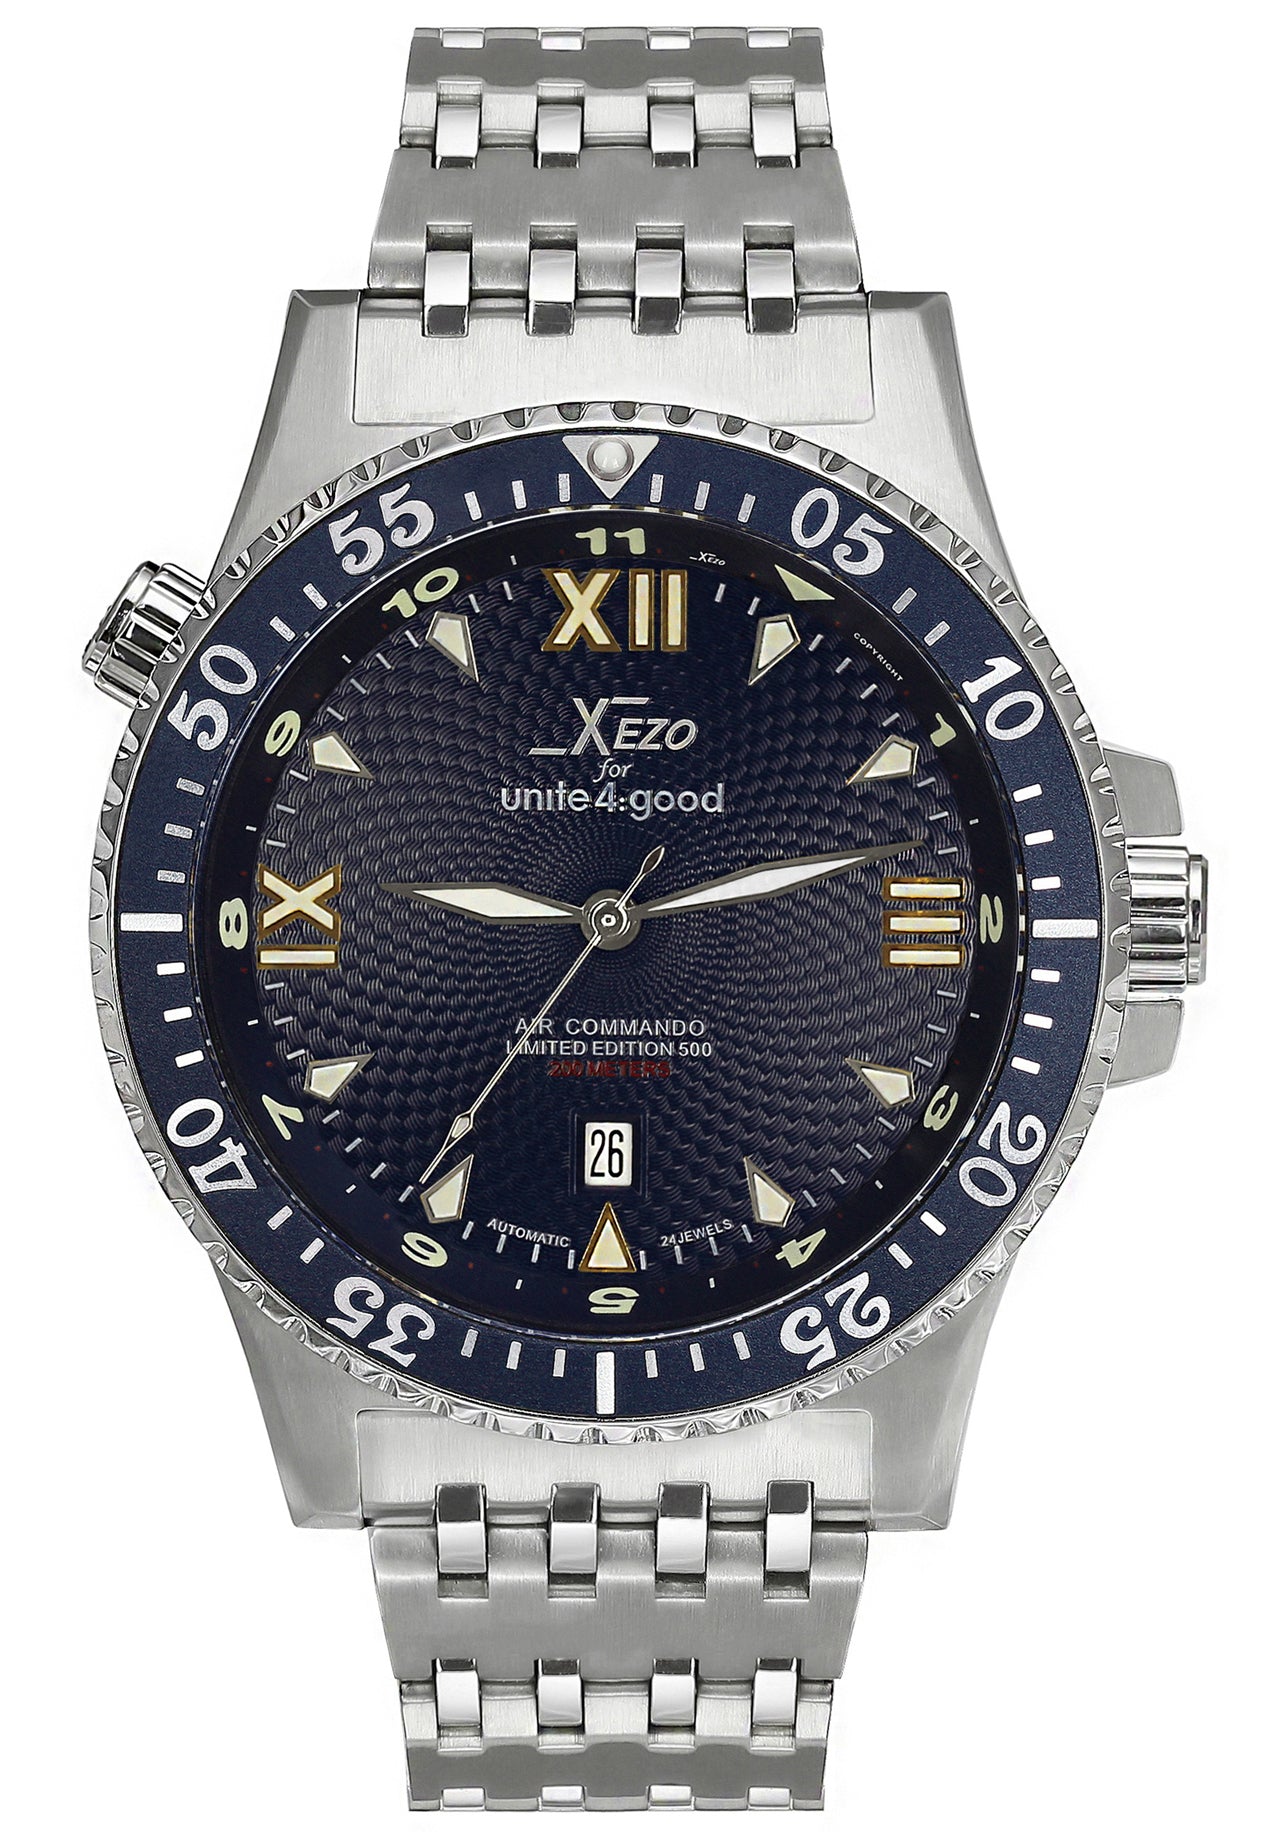 Xezo - Front view of the Air Commando D45-BM watch